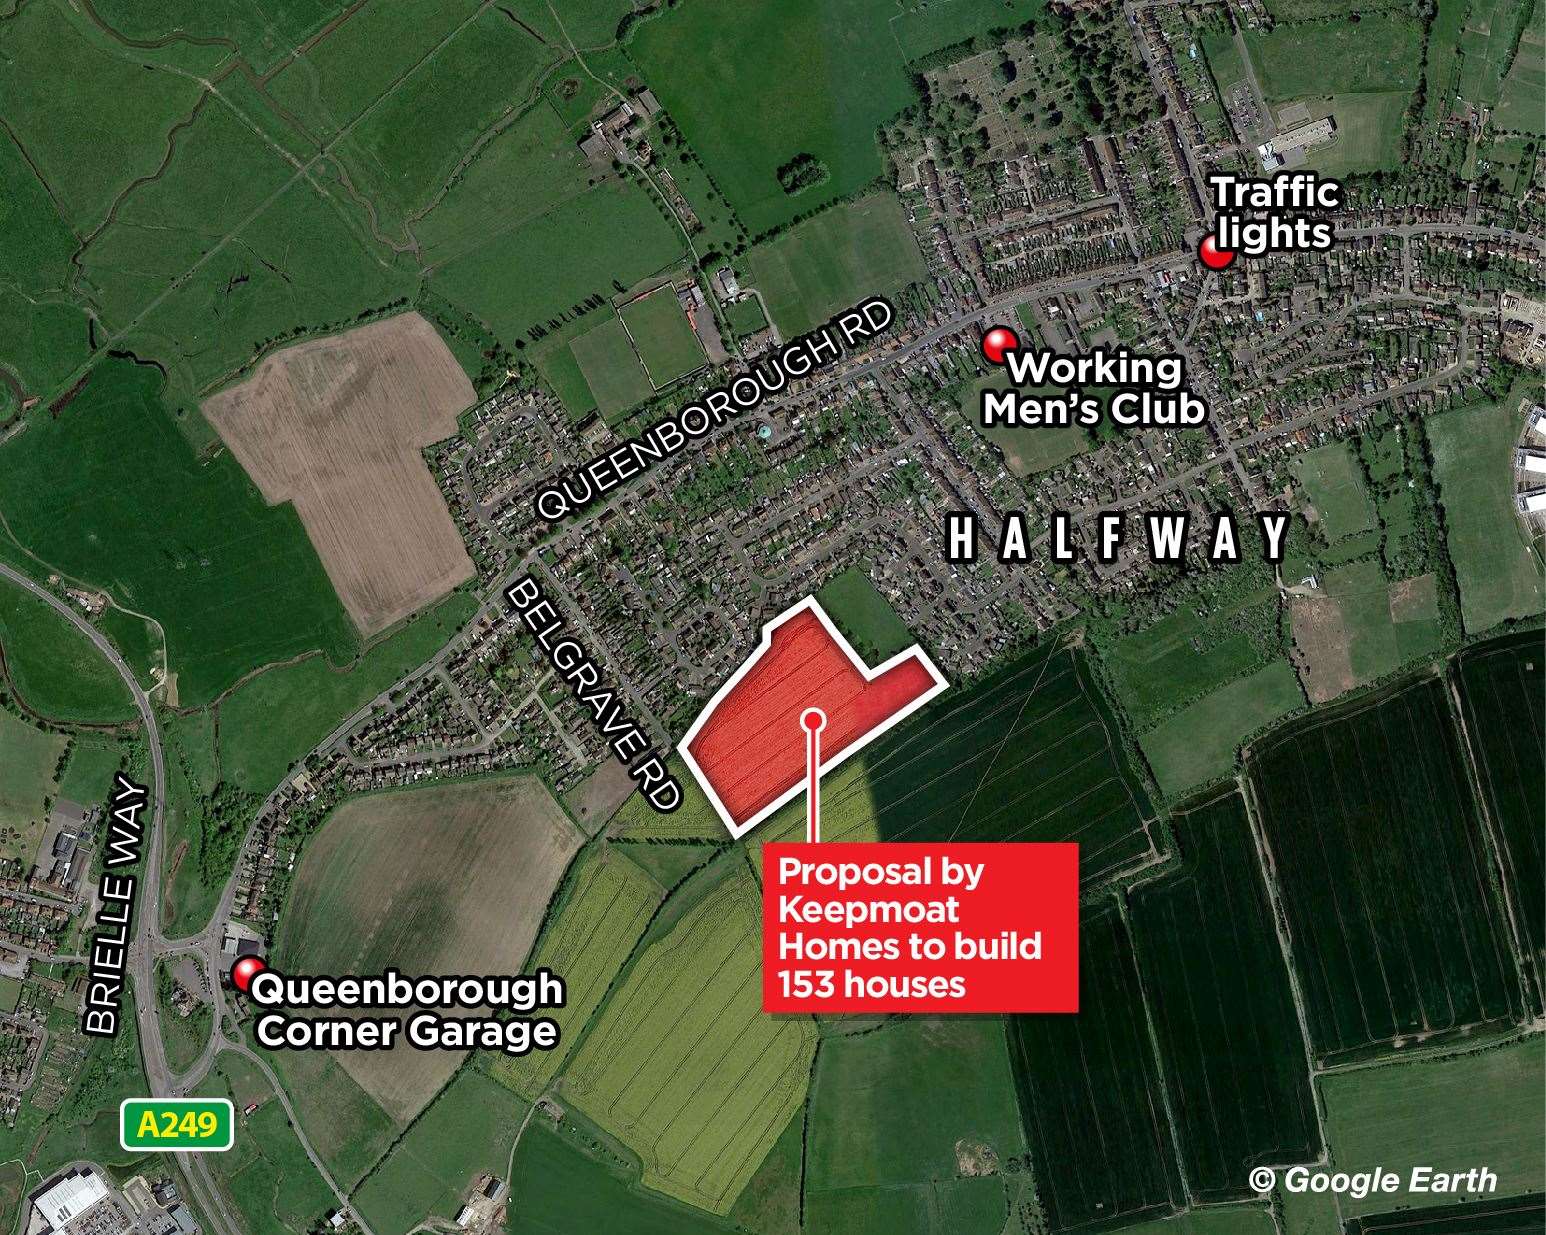 The Keepmoat Homes proposal for 153 homes in Halfway has been approved by Swale council